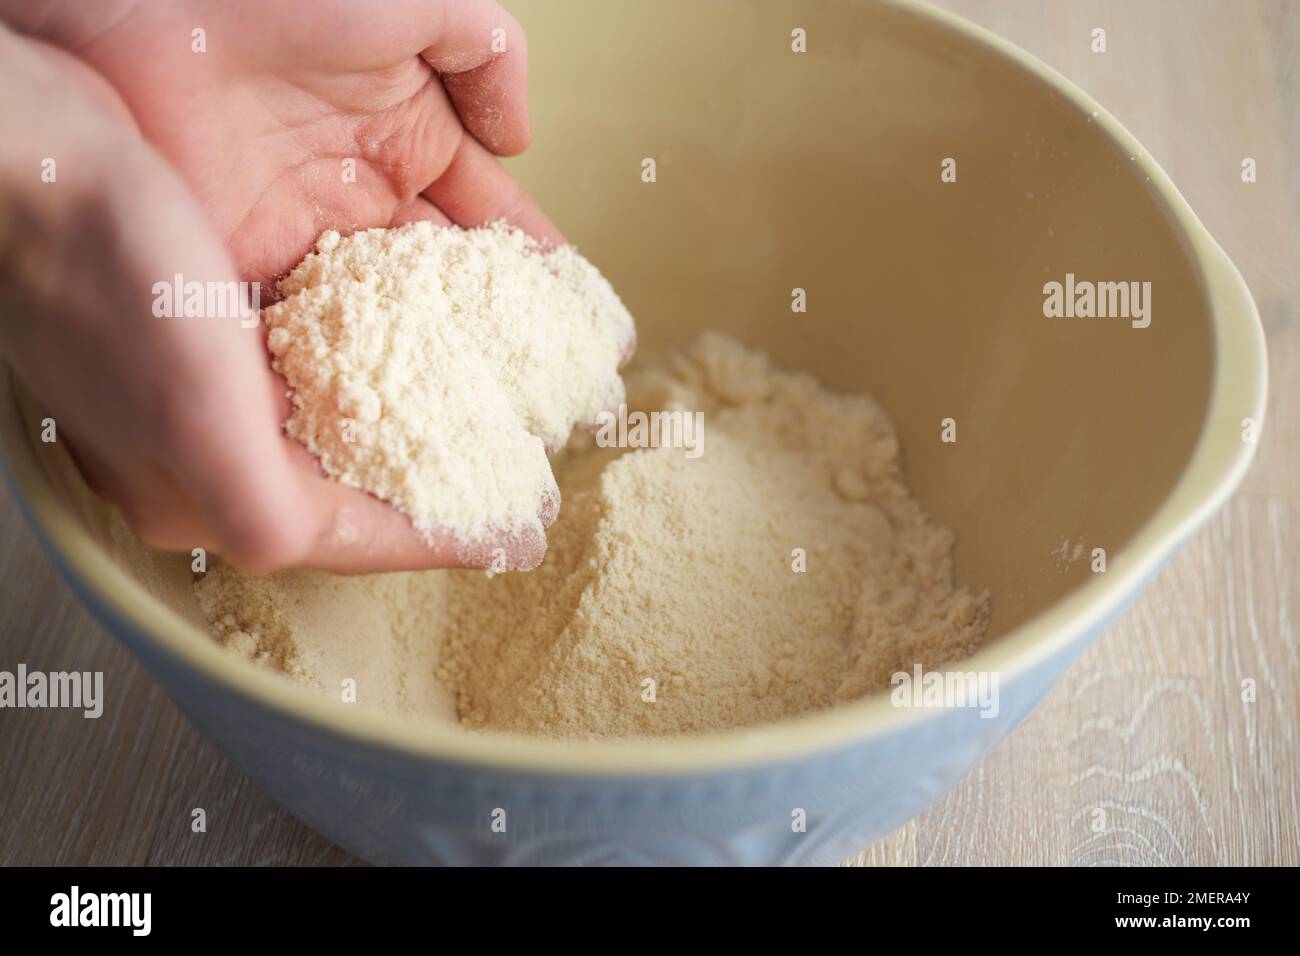 Butter and flour mixed together in a blender stock photo - OFFSET